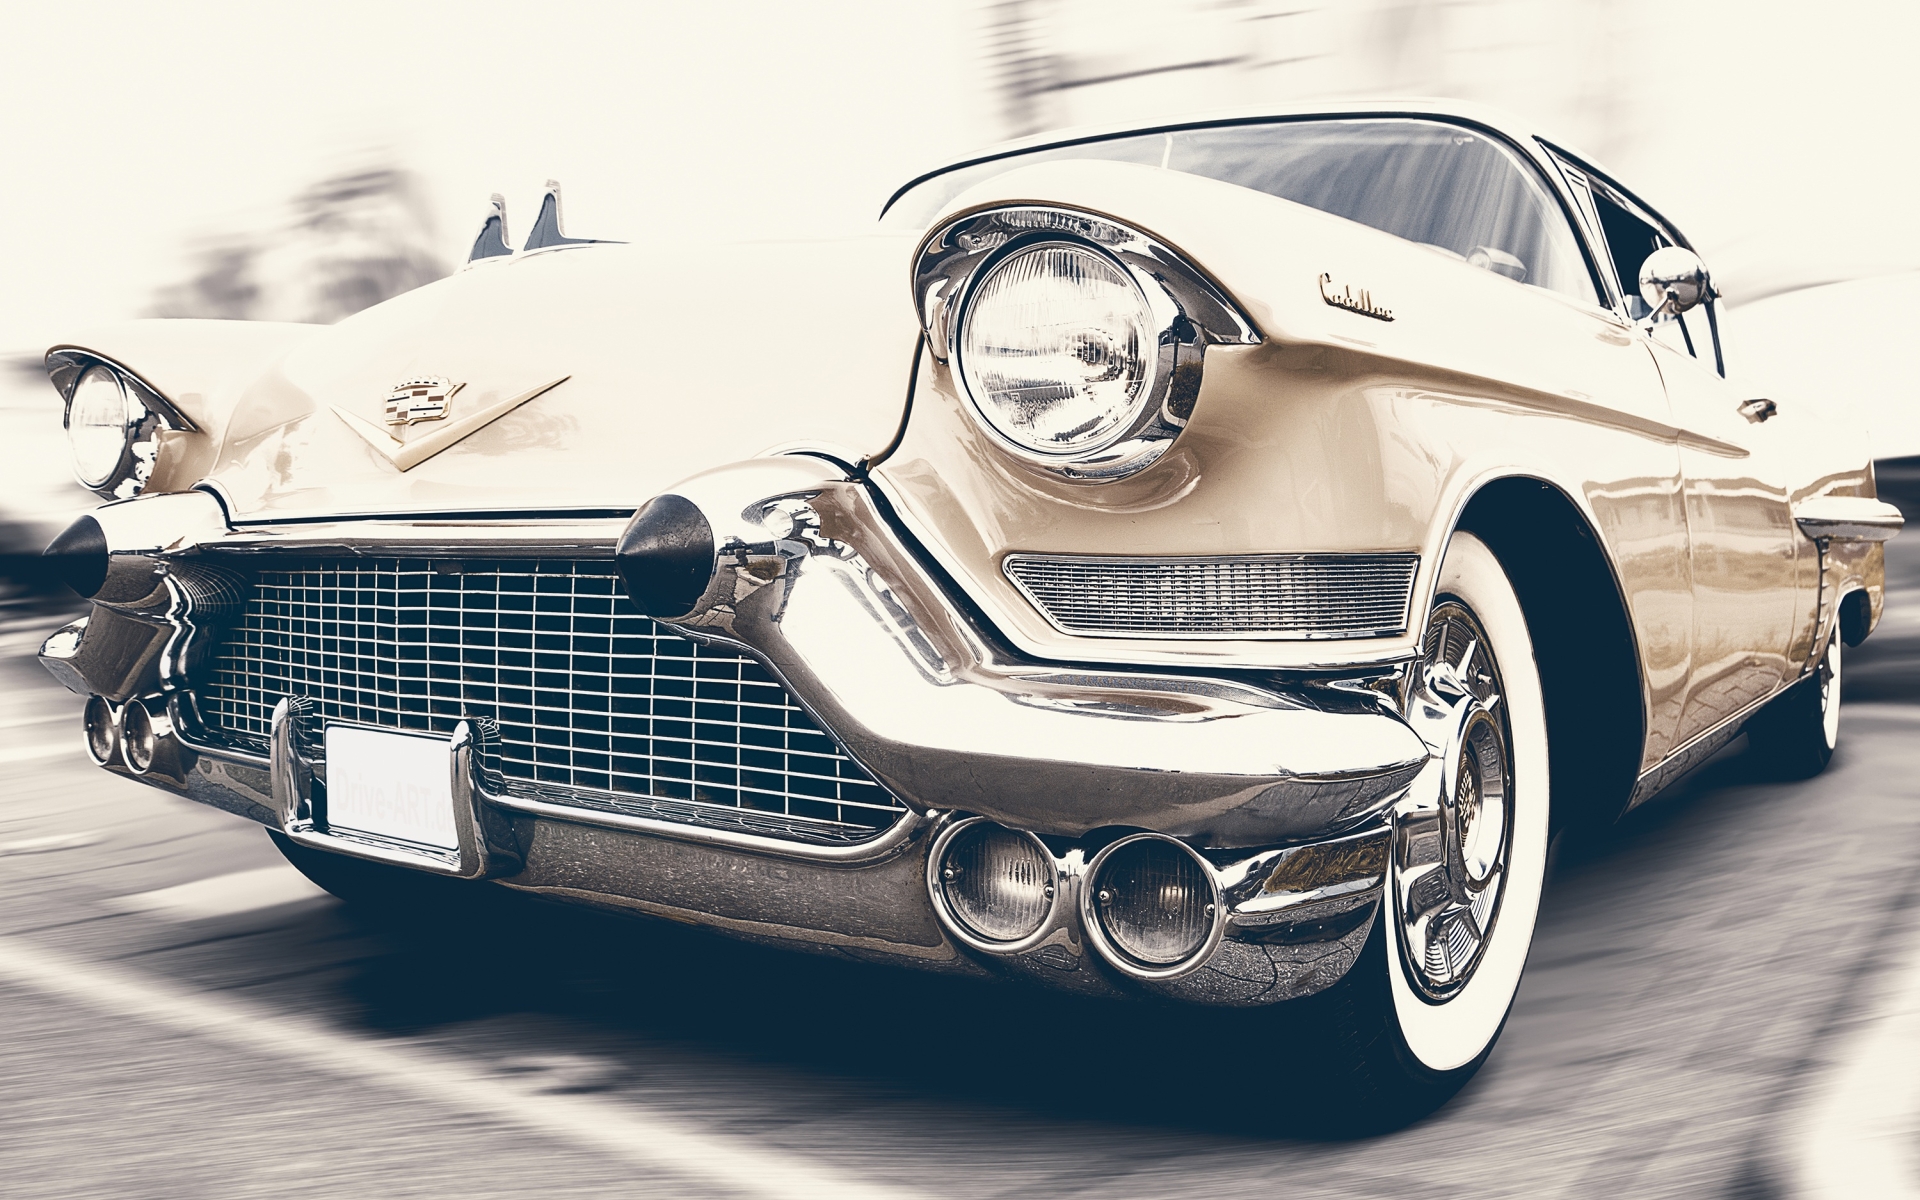 1920x1200 Resolution Cadillac Oldtimer Front View 1200p Wallpaper Wallpapers Den